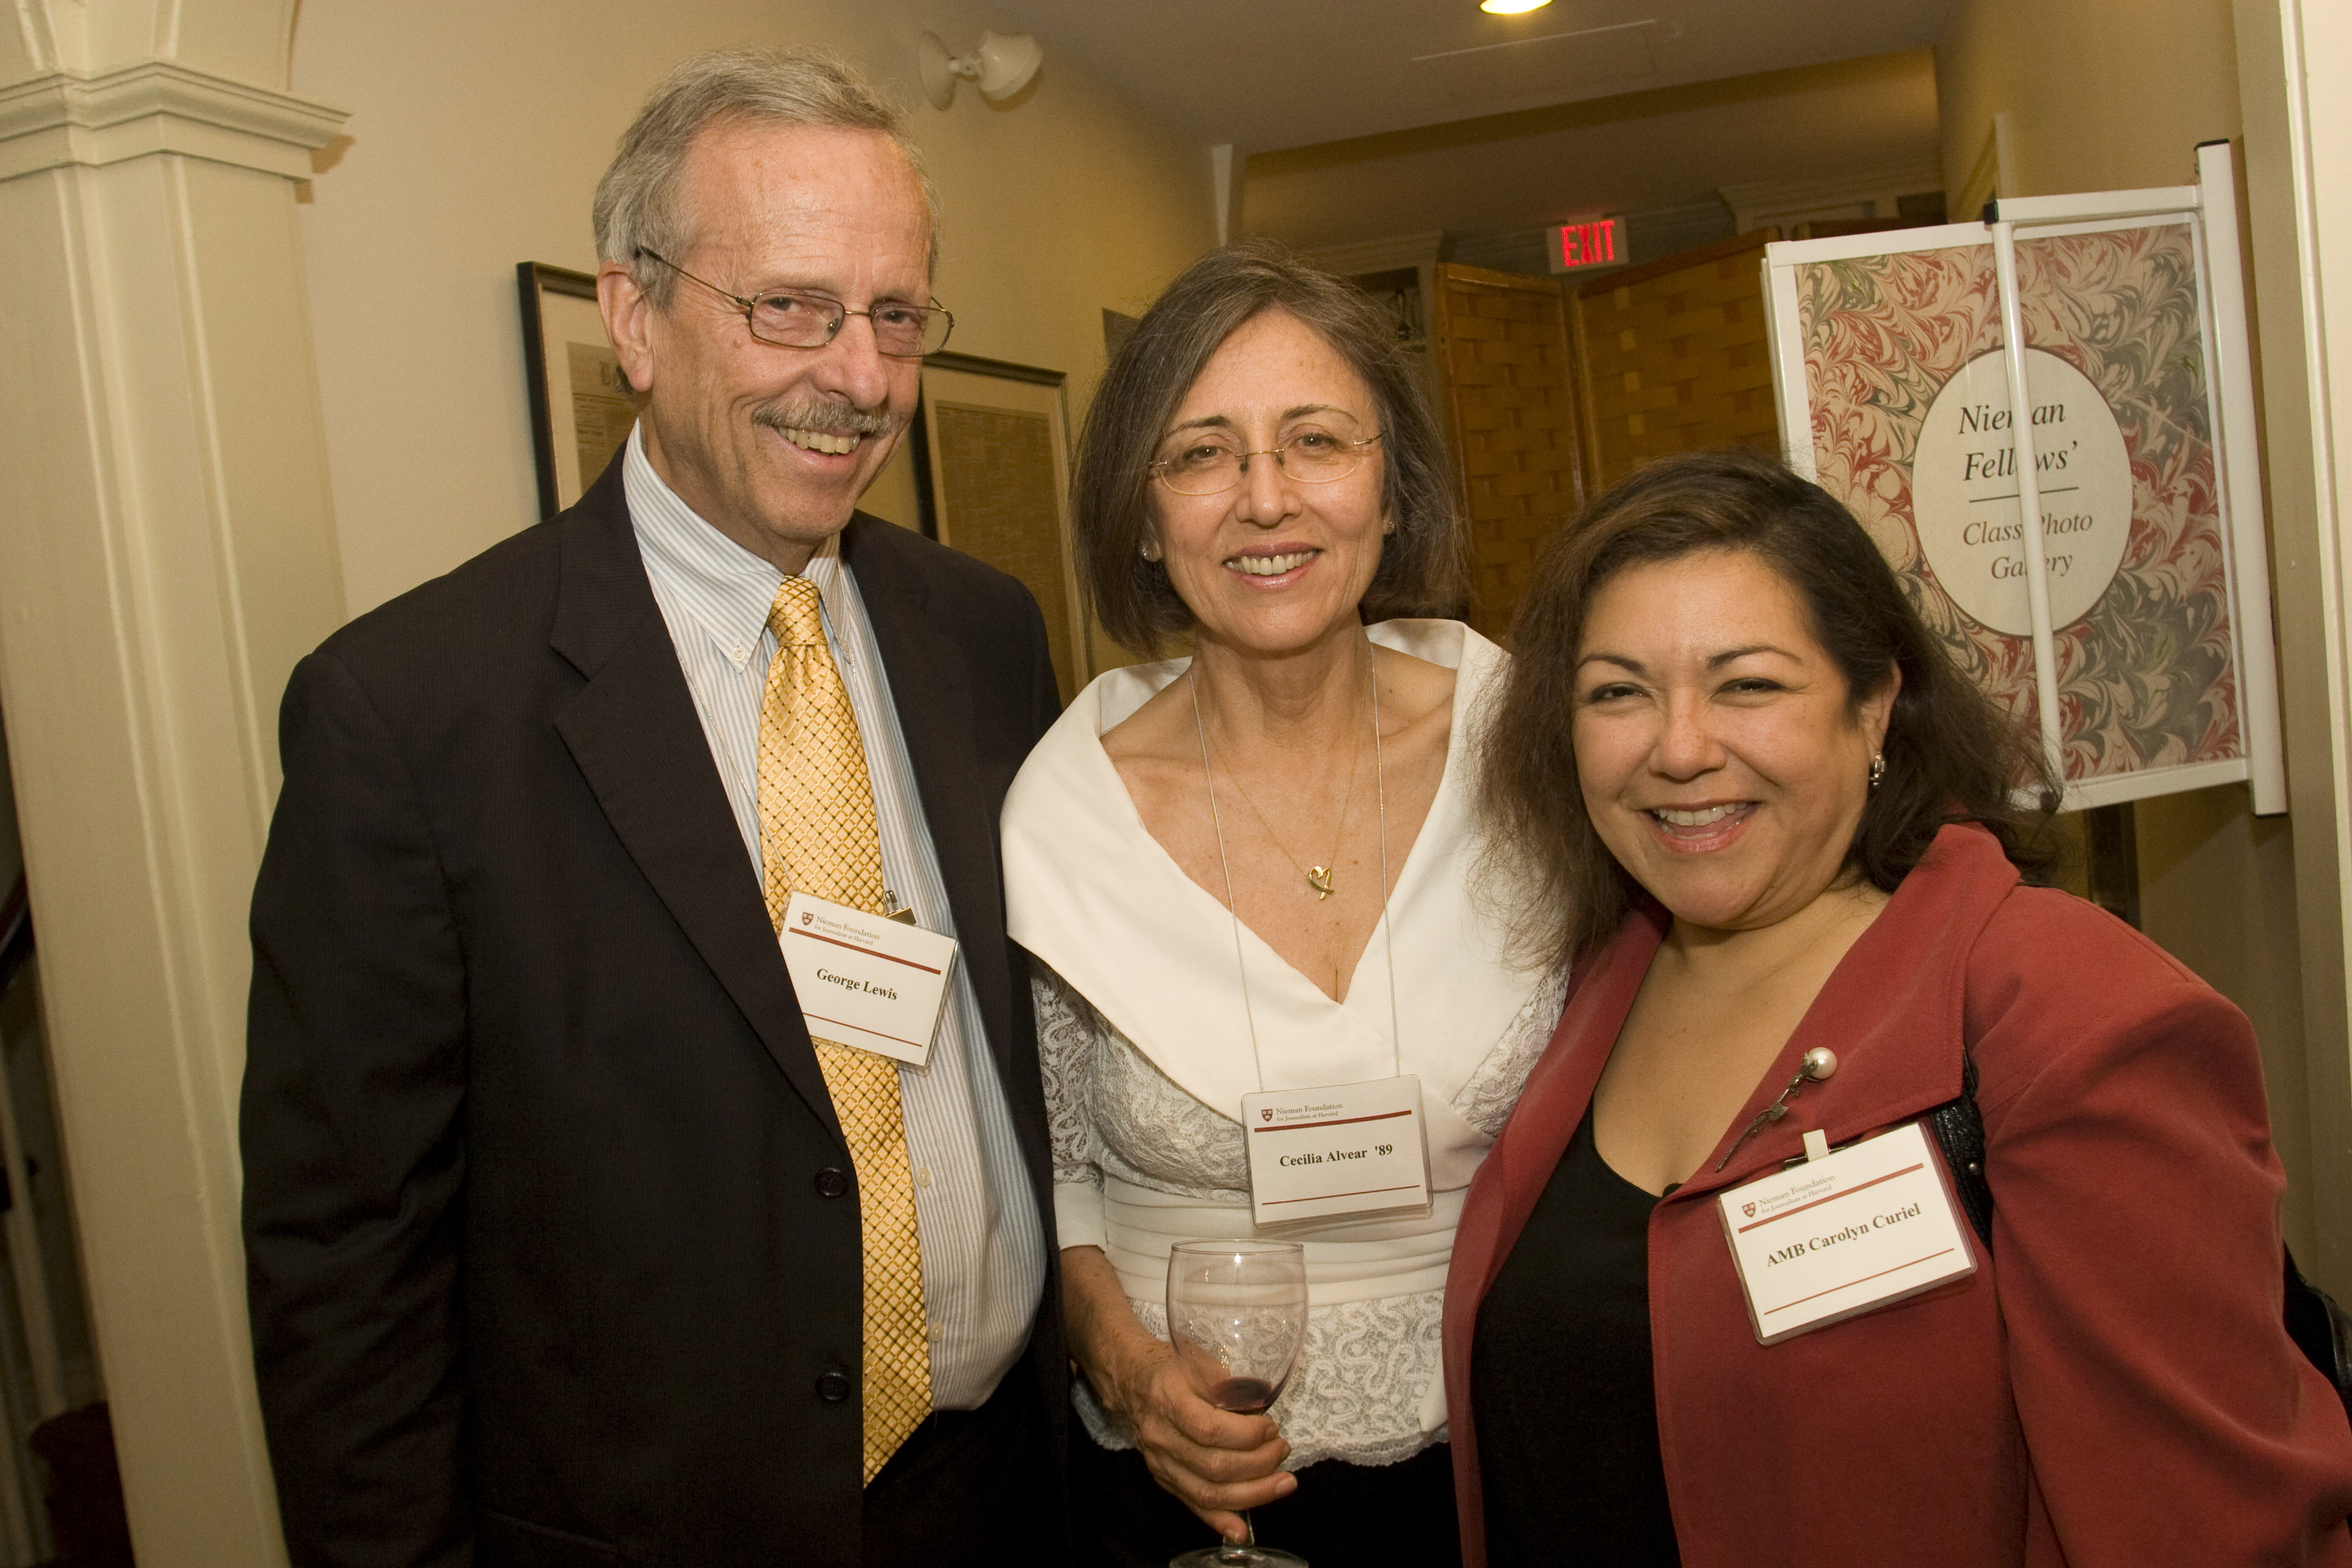 Cecilia Alvear with her partner George Lewis and former Nieman advisory board member Carolyn Curiel at Nieman's 70th Convocation in 2008